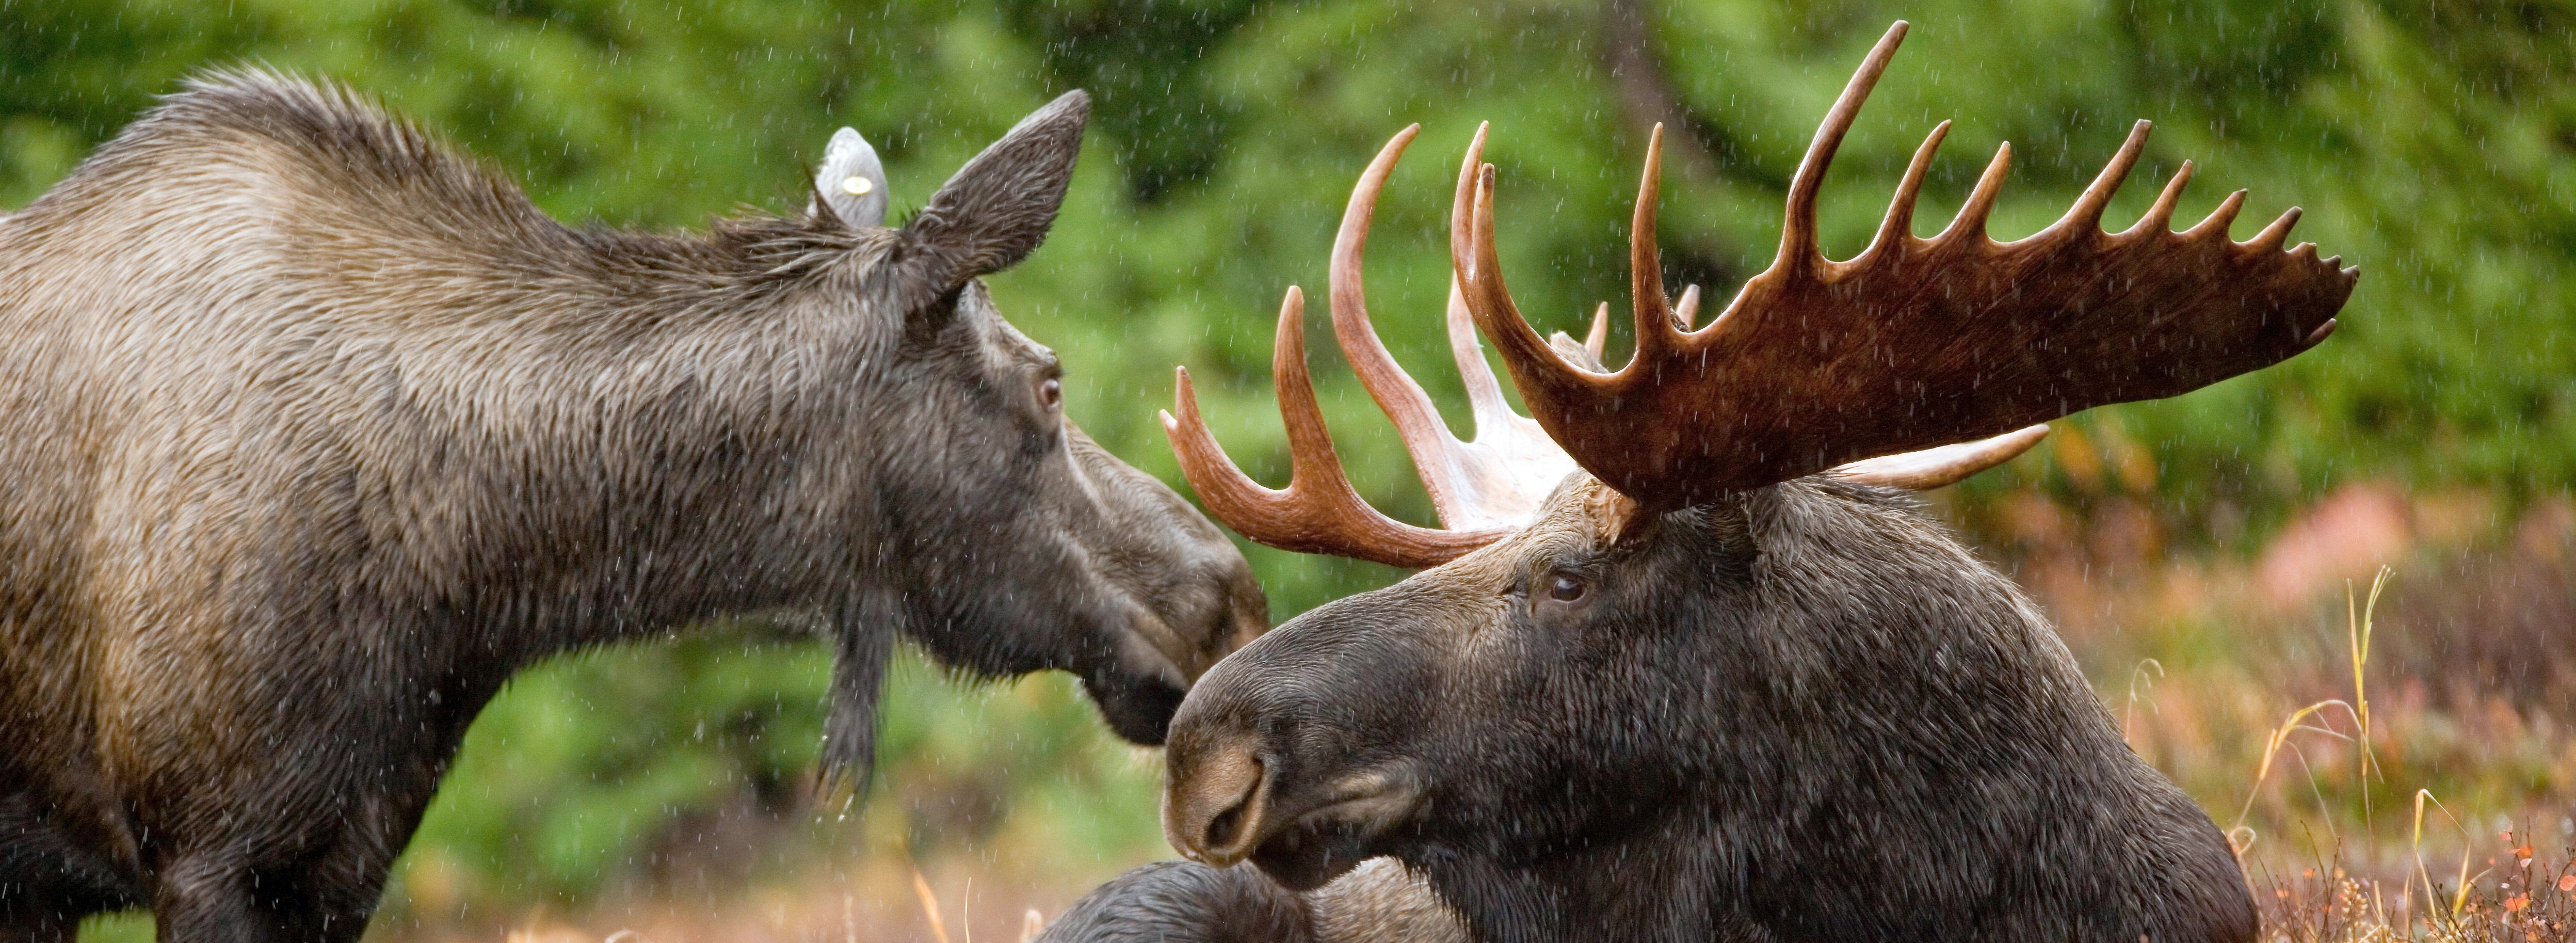 A close-up of two moose -- a female and a male -- face to face in a field